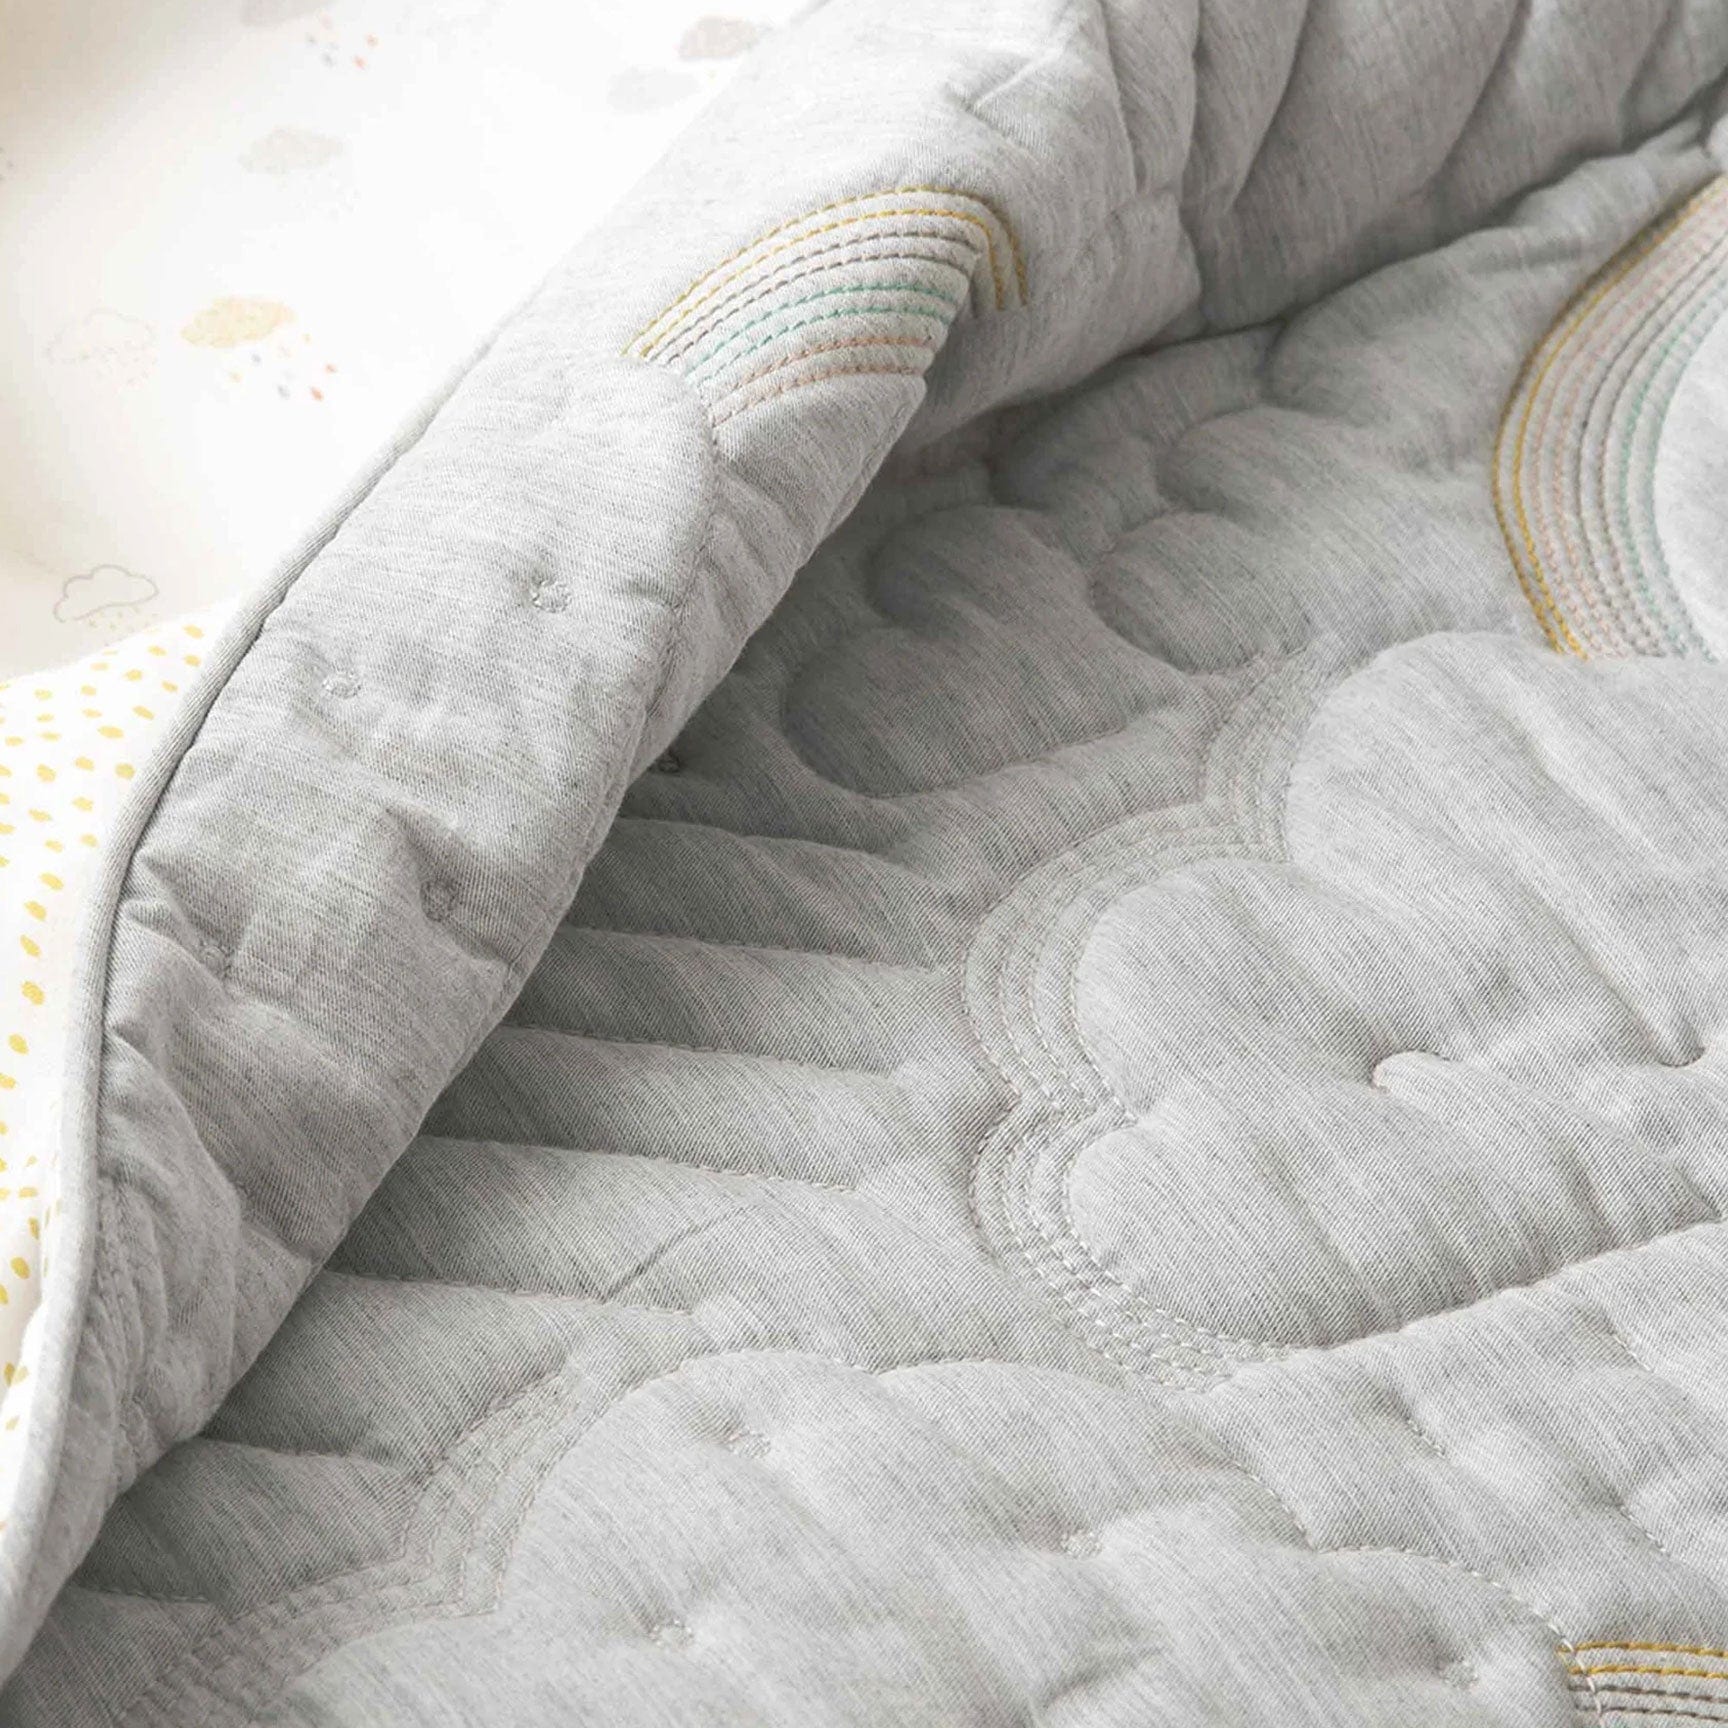 Mamas & Papas Dream upon a Cloud Quilt in Grey Cot & Cot Bed Quilts 7041T8301 5057232514442